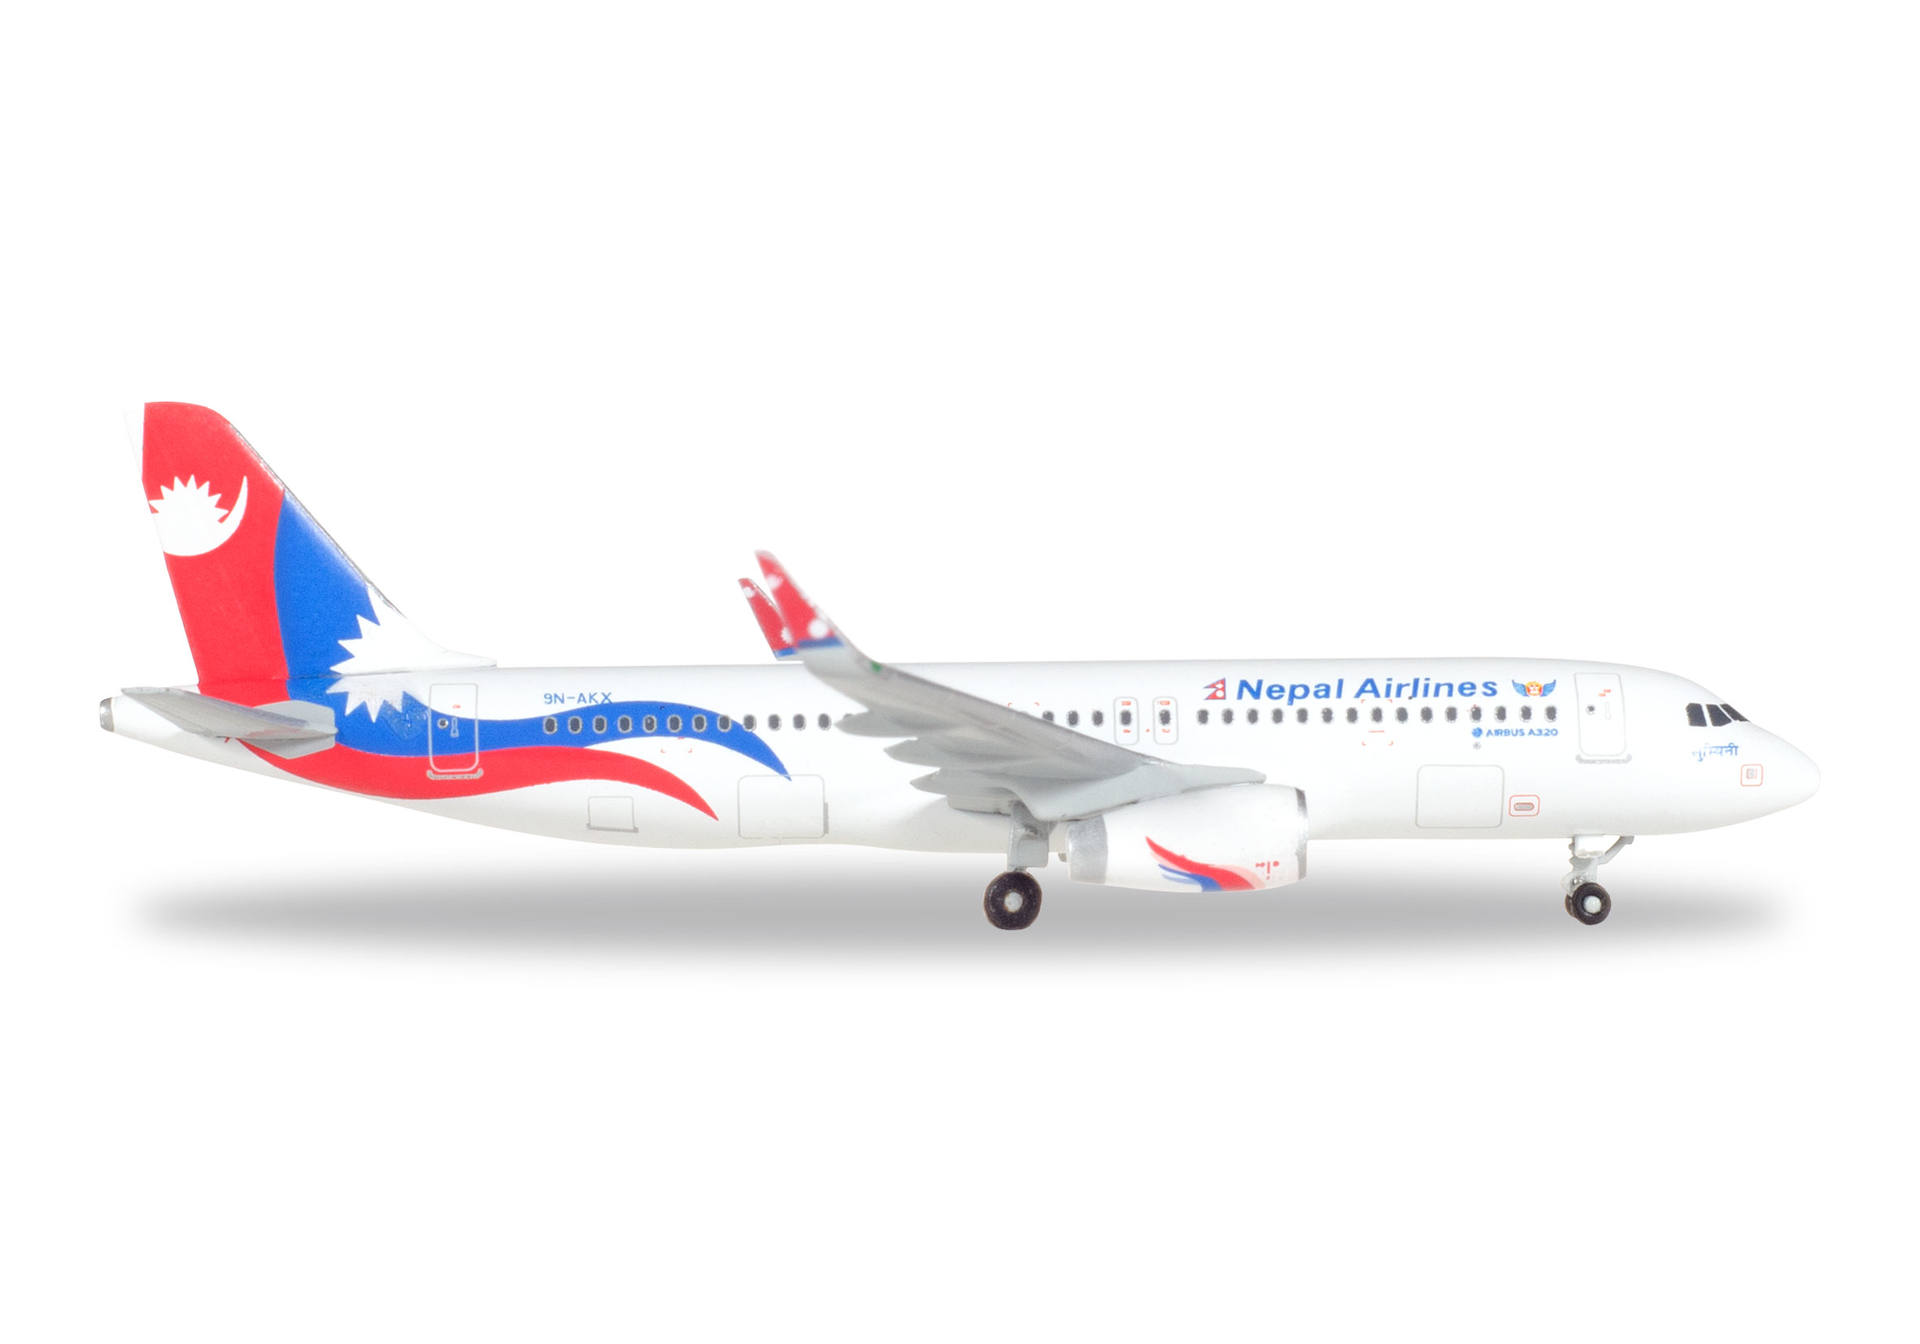 A320 Nepal Airlines